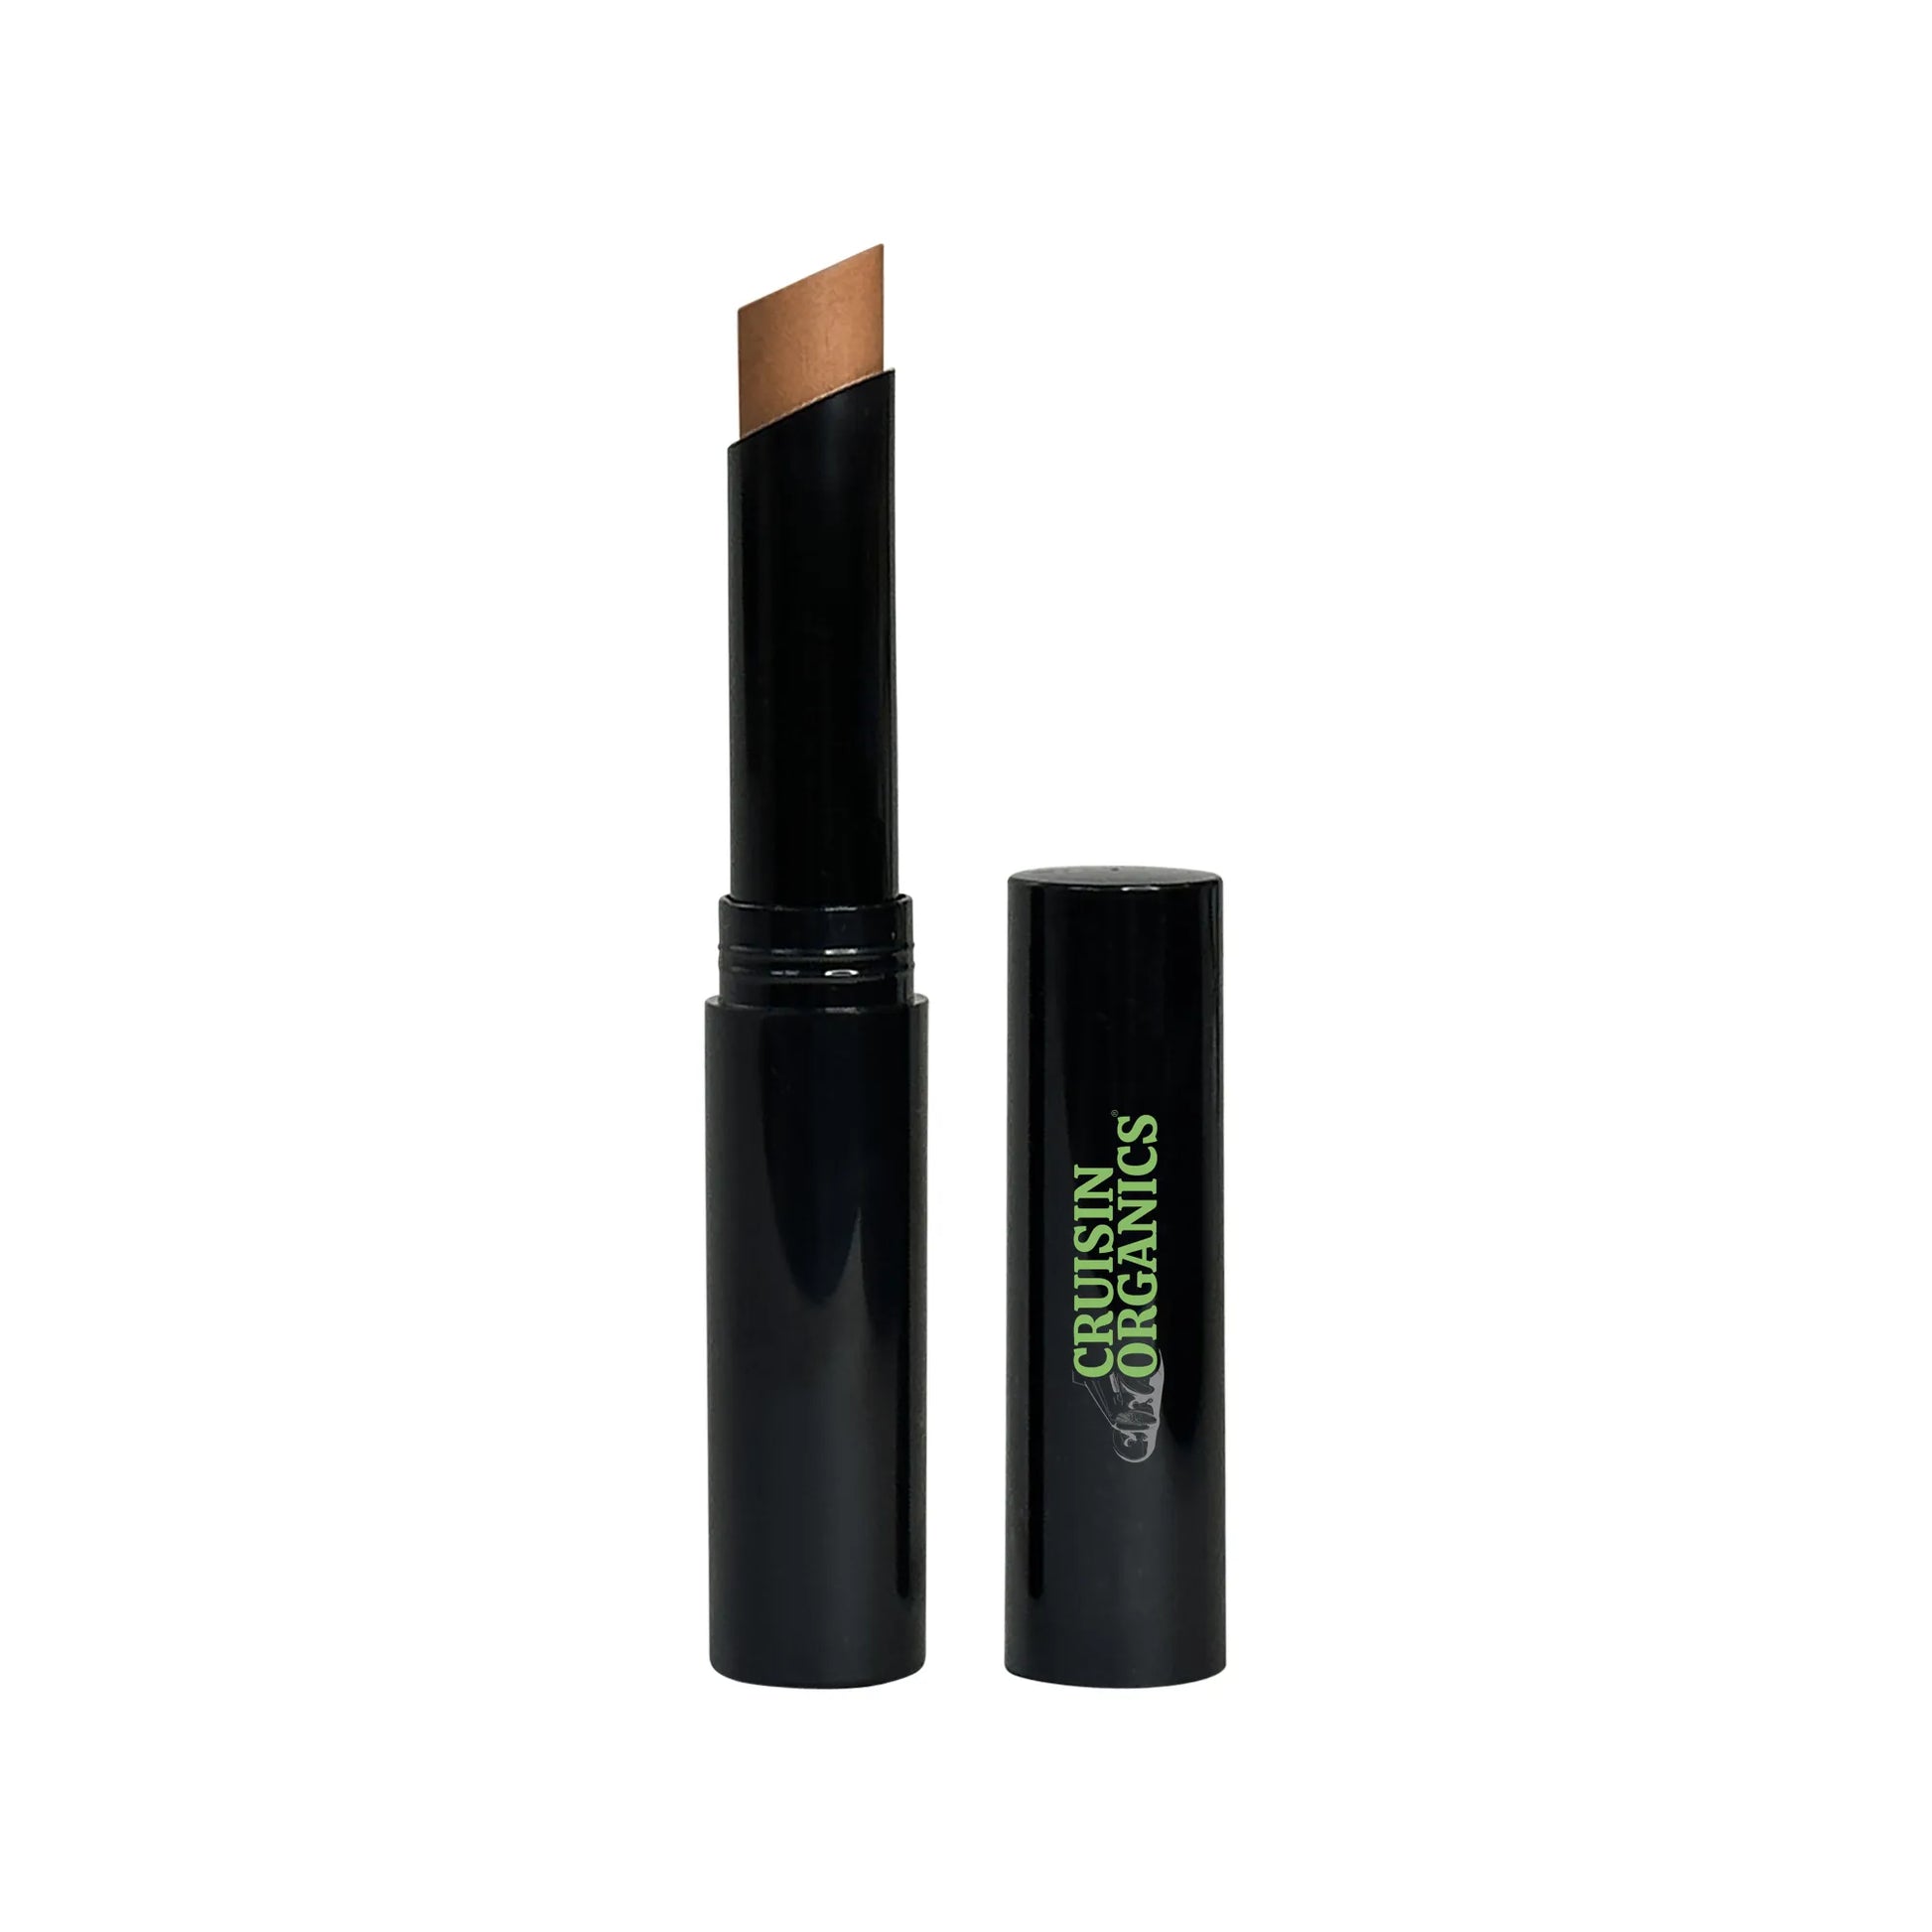 Get flawless, natural-looking coverage with Cruisin Organics Pecan Creme Concealer Stick. Infused with nourishing pecan oil, this stick concealer will leave your skin looking smooth and radiant. Say goodbye to blemishes and imperfections, and hello to a perfect complexion. Dermatologist recommended.